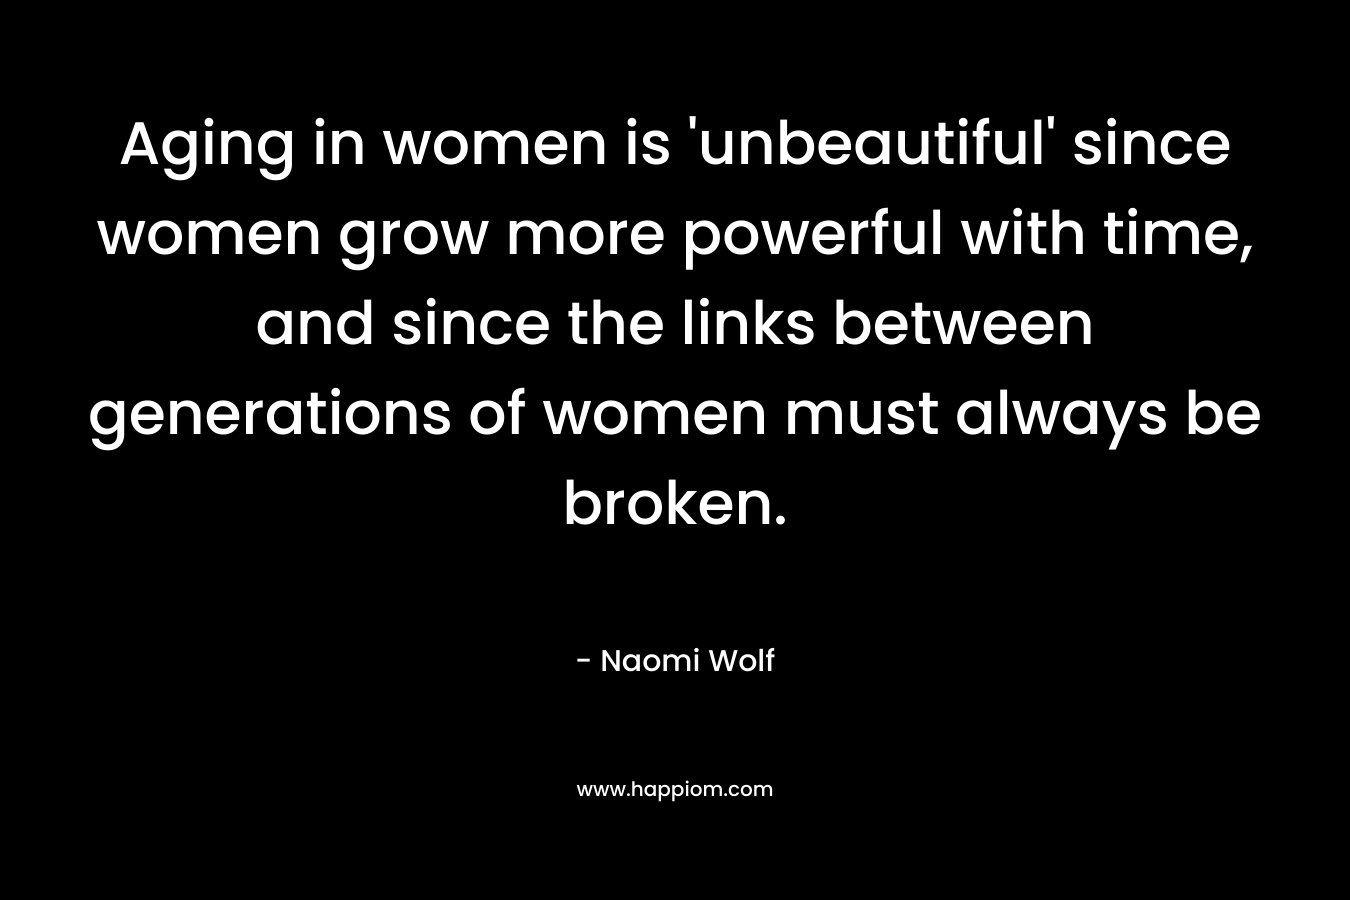 Aging in women is ‘unbeautiful’ since women grow more powerful with time, and since the links between generations of women must always be broken. – Naomi Wolf